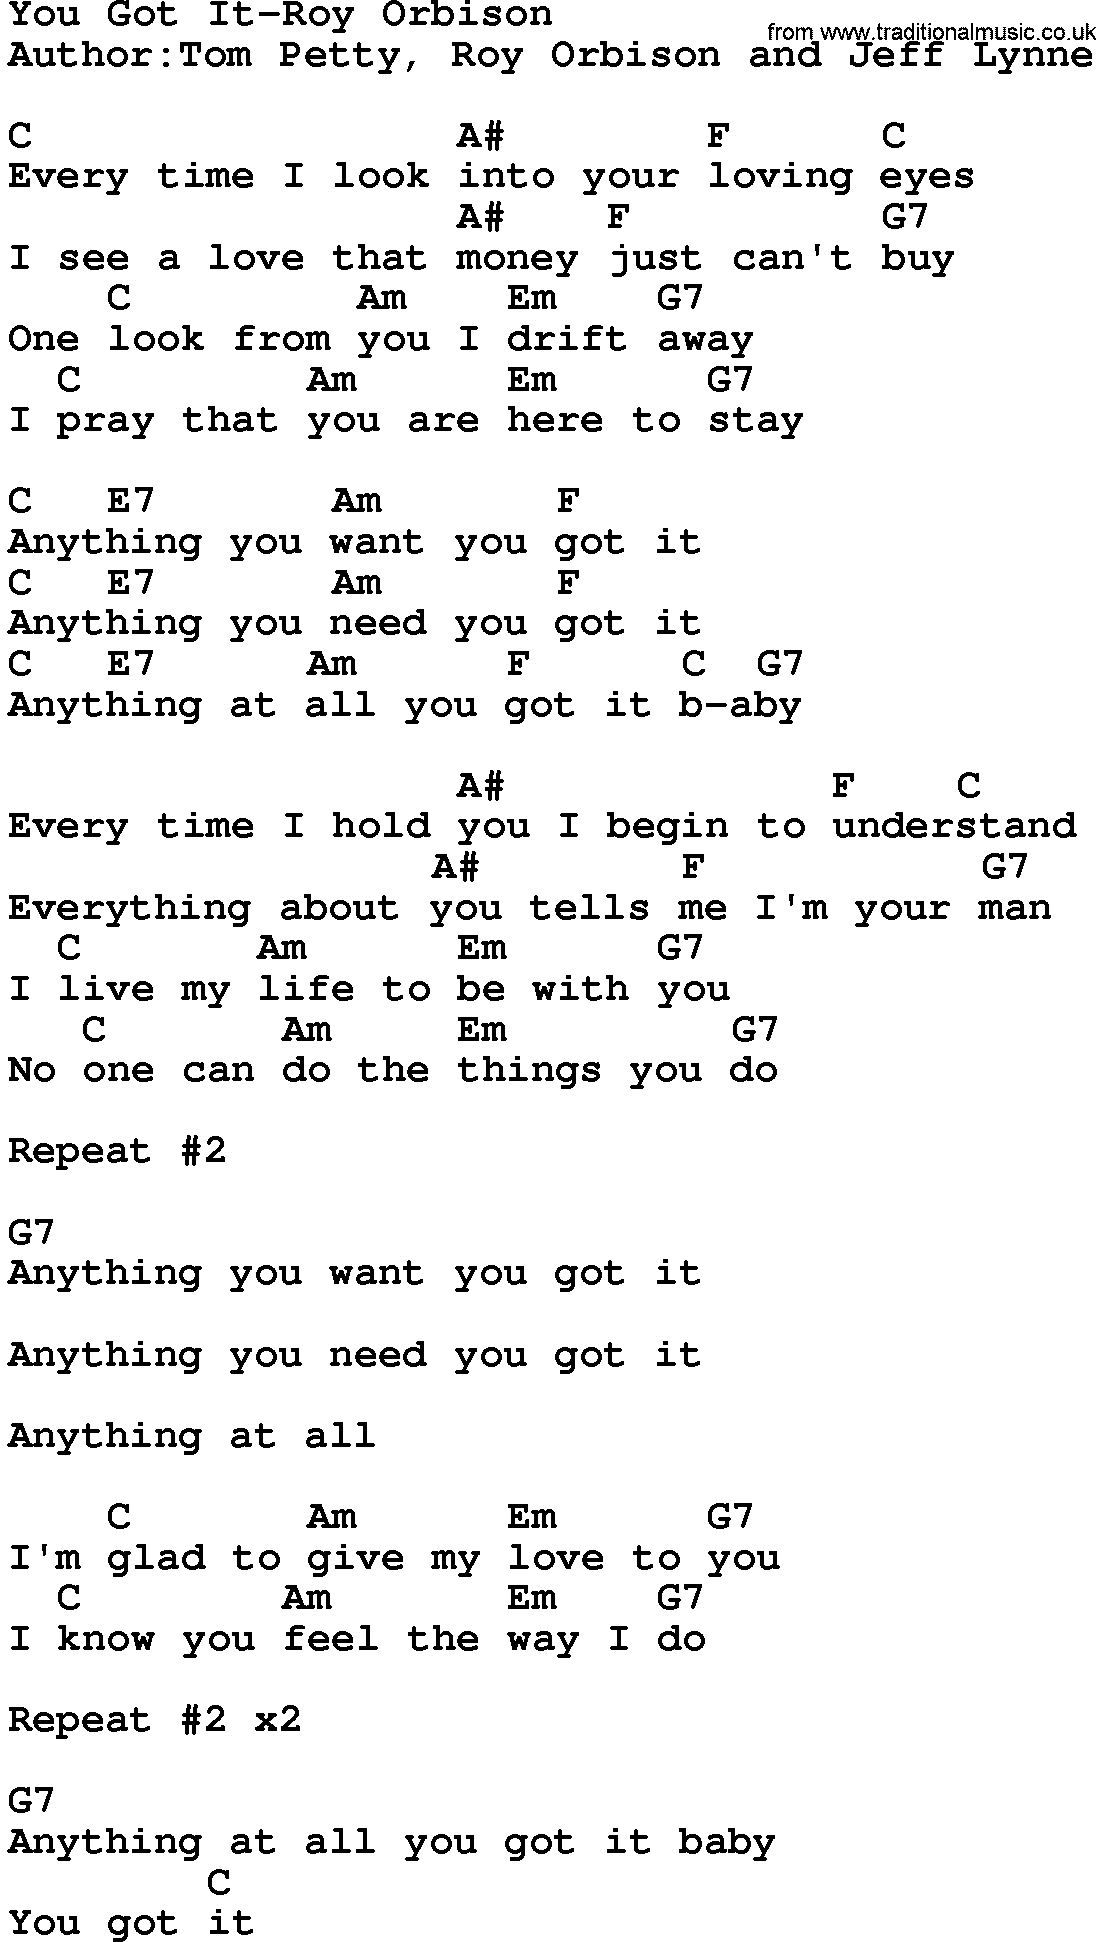 Country music song: You Got It-Roy Orbison lyrics and chords